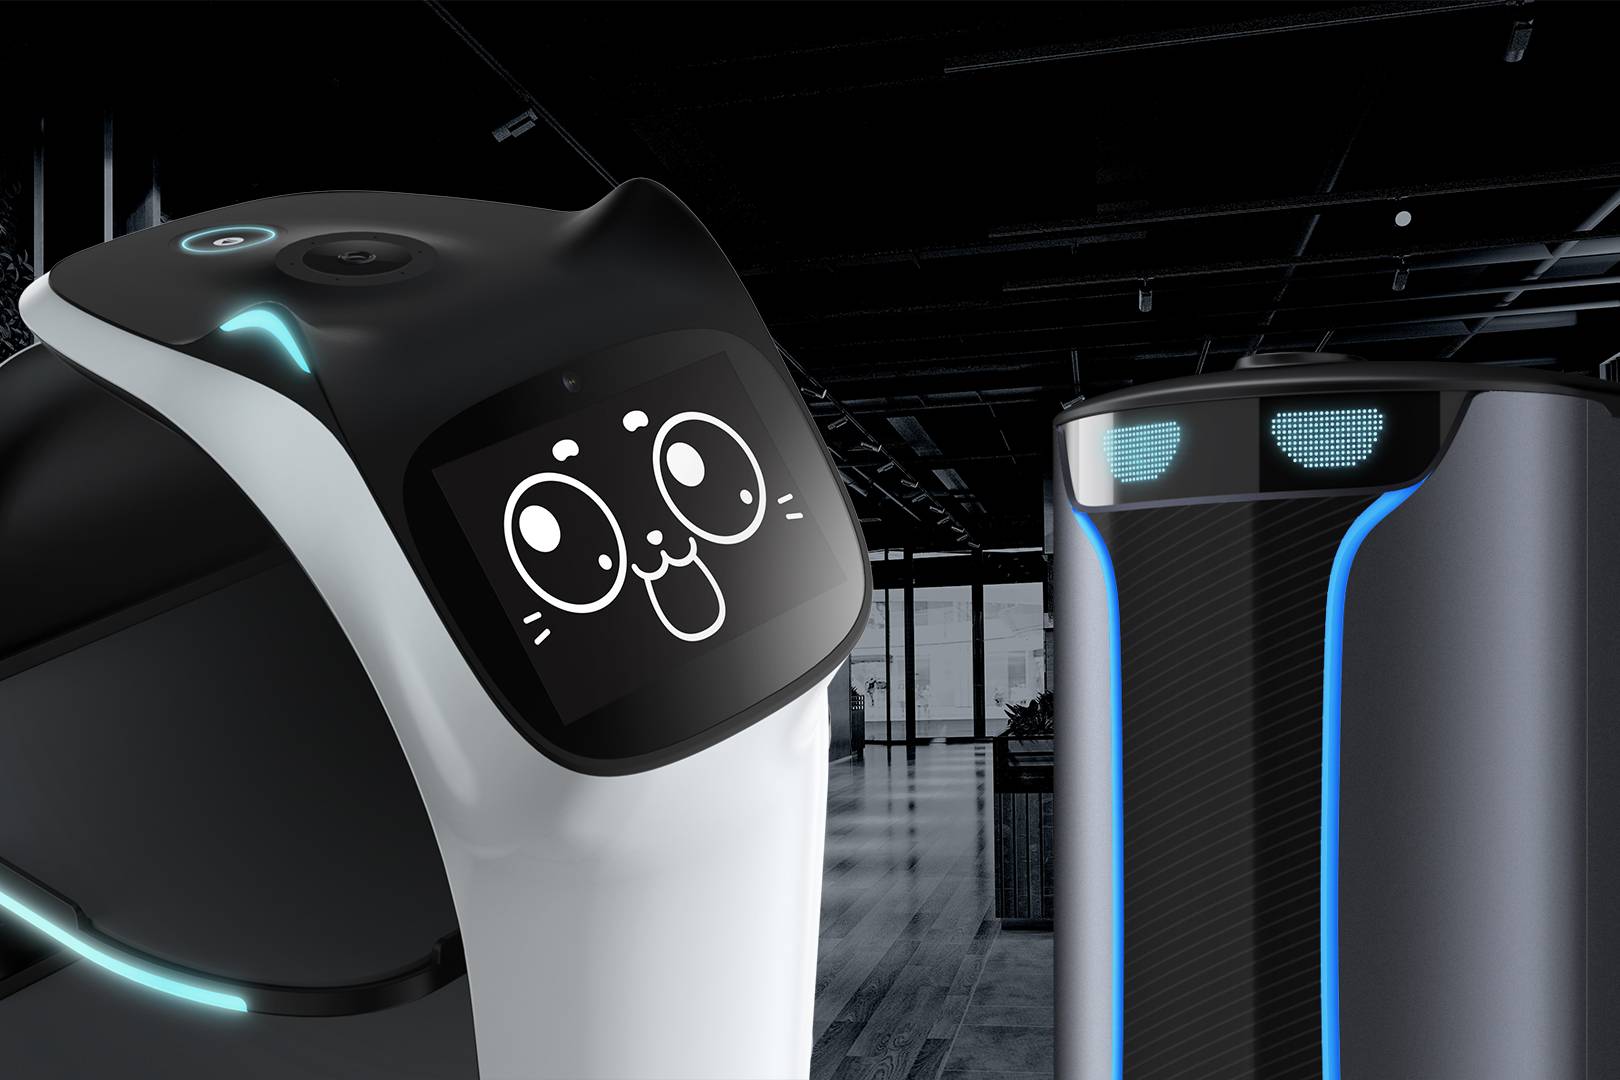 kamasys now offers the service robots BellaBot and HolaBot